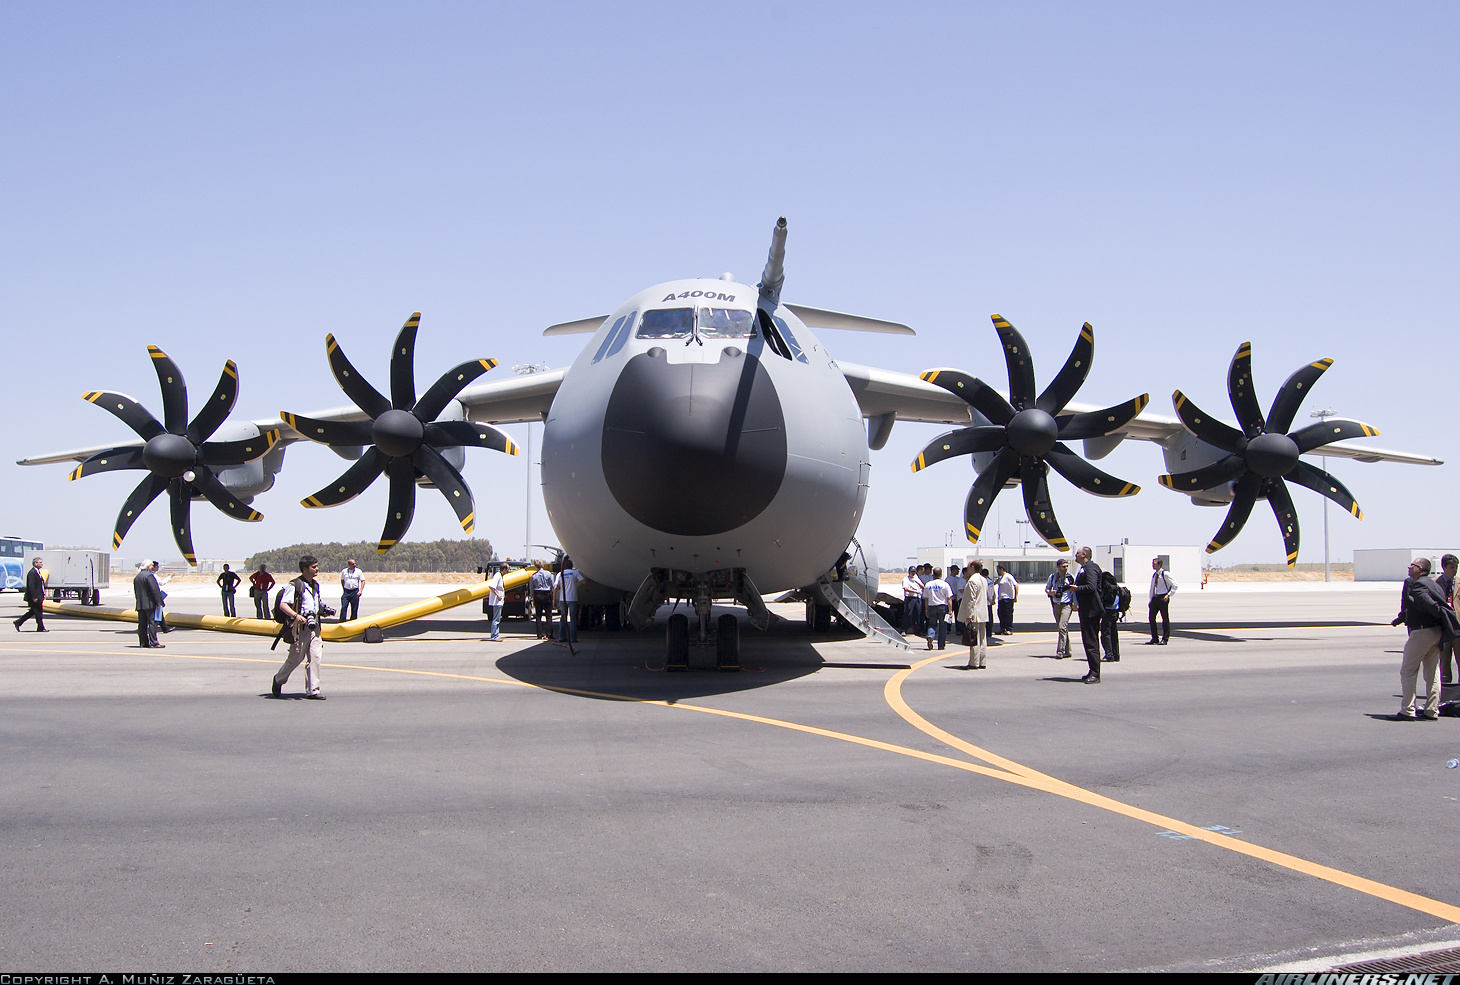 Nice wallpapers Airbus A400M 1460x985px